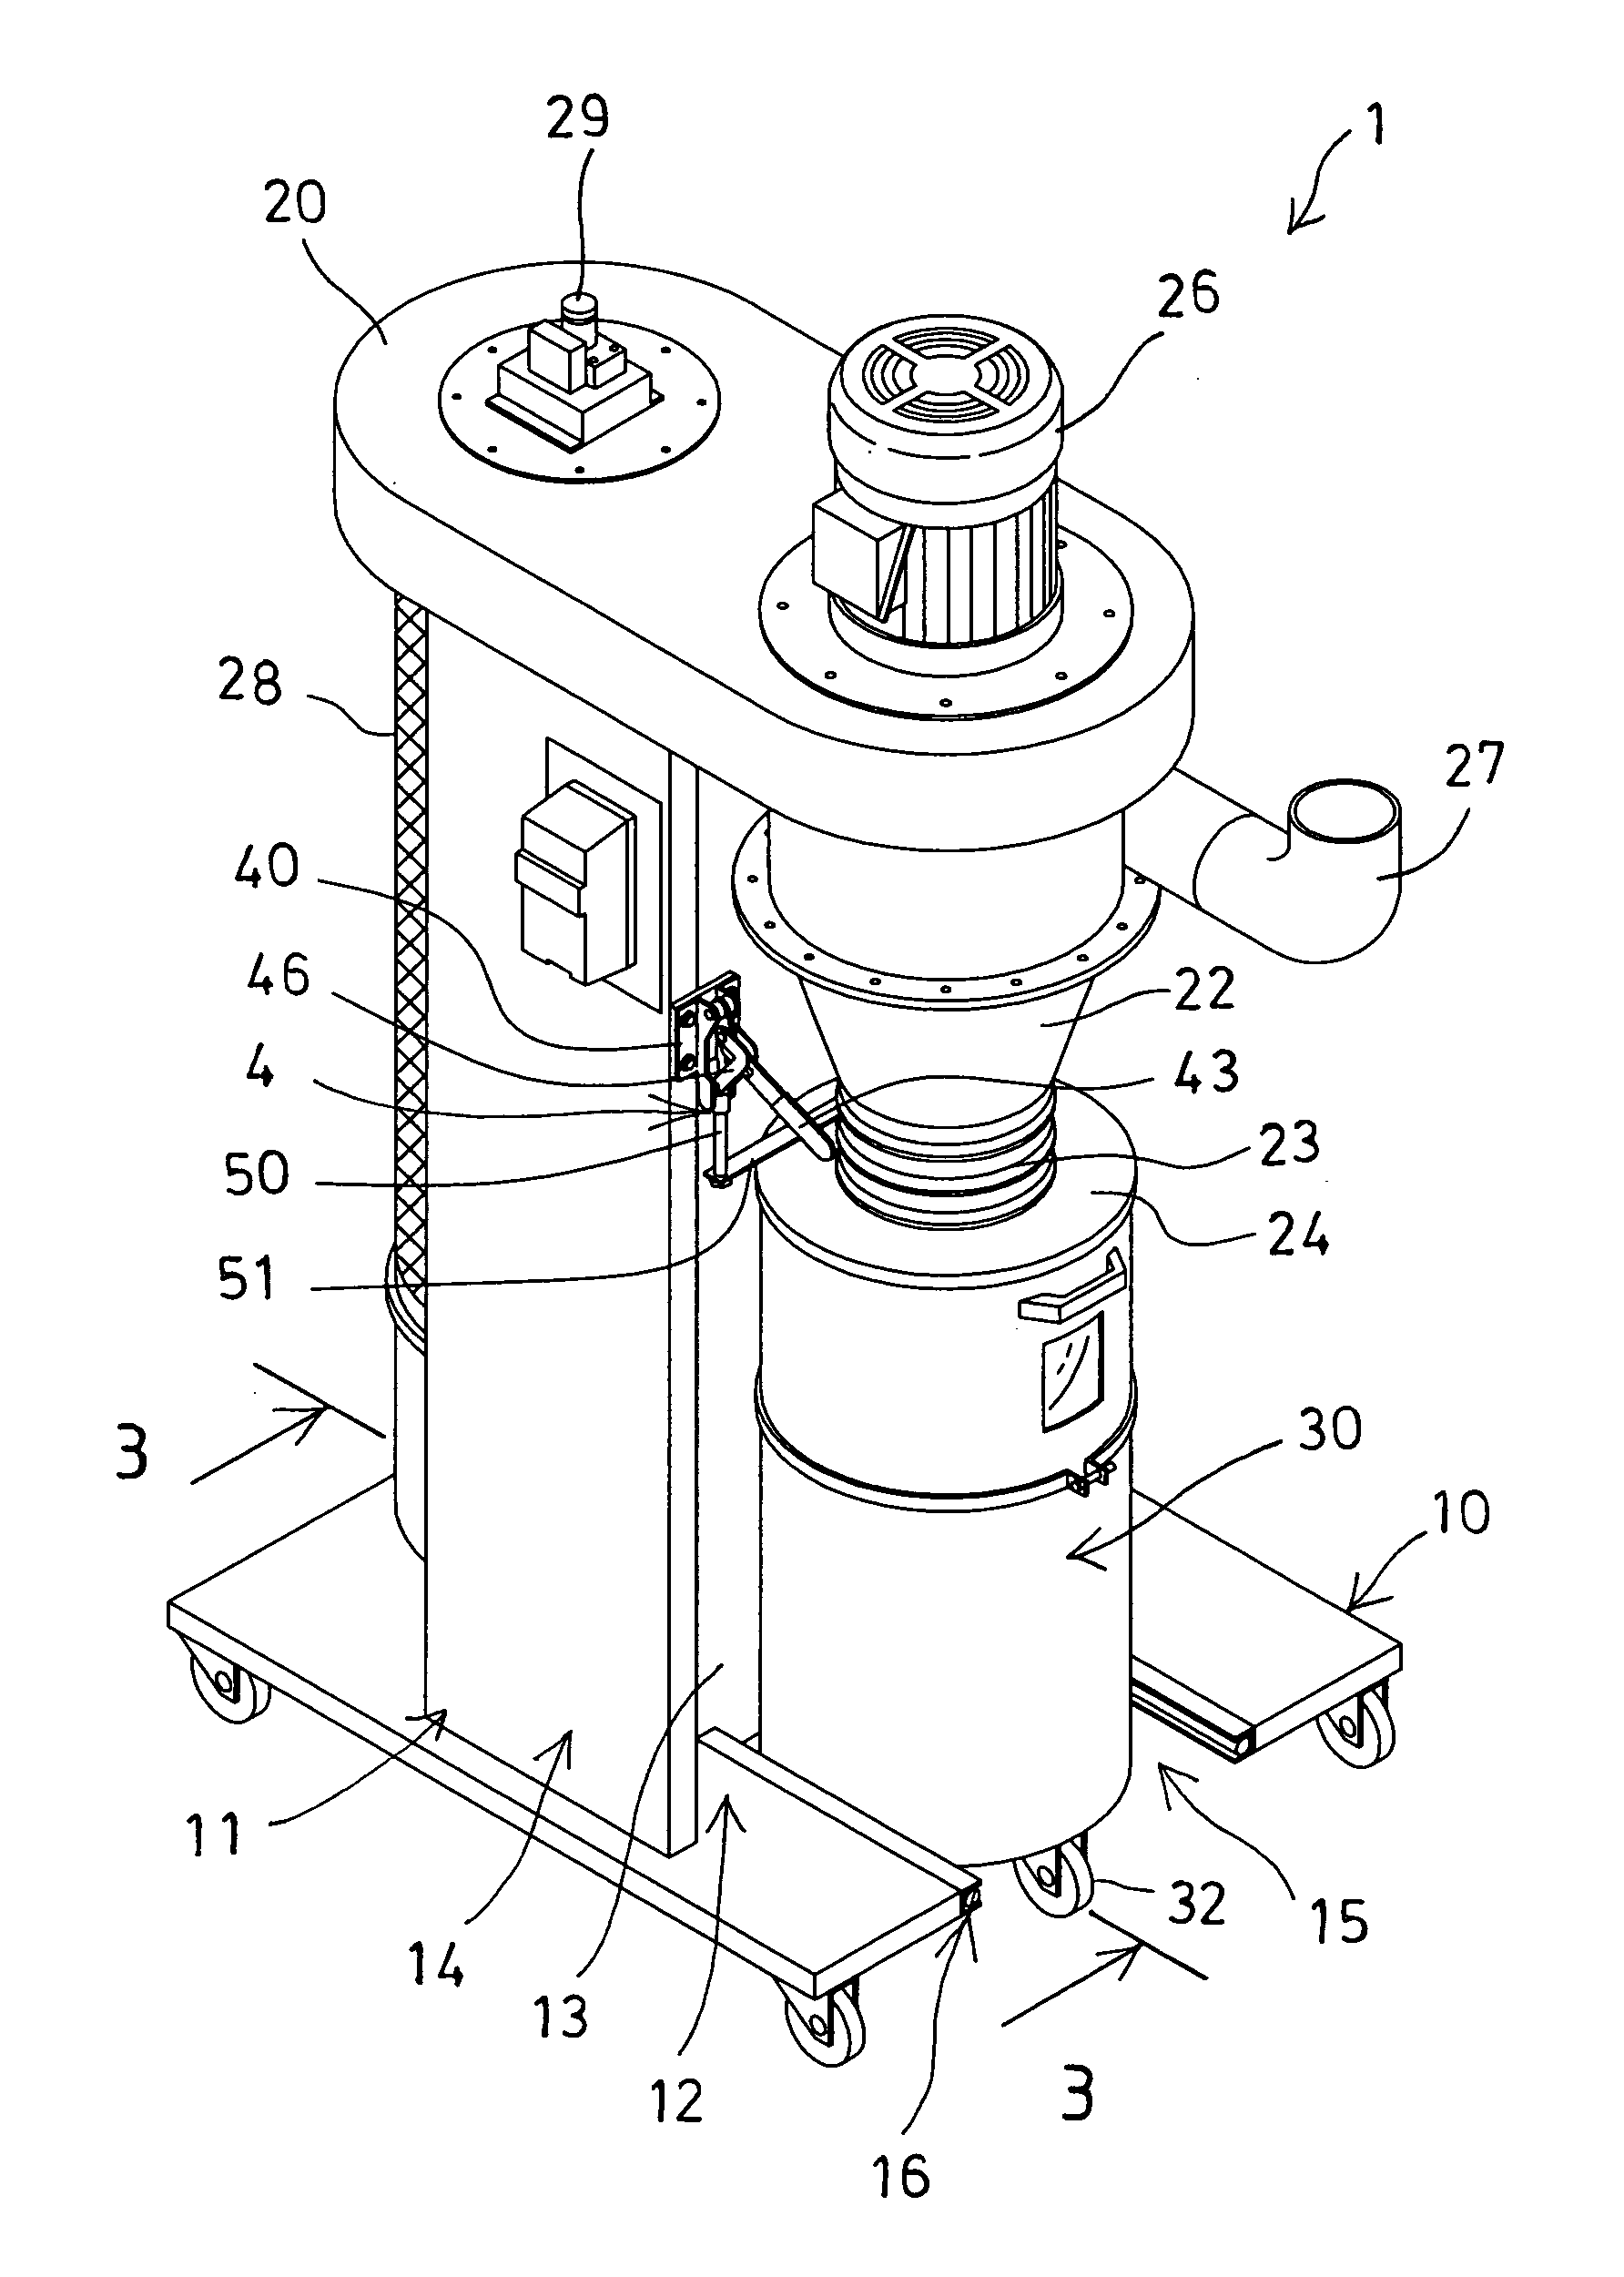 Removable dust receptacle for dust collector